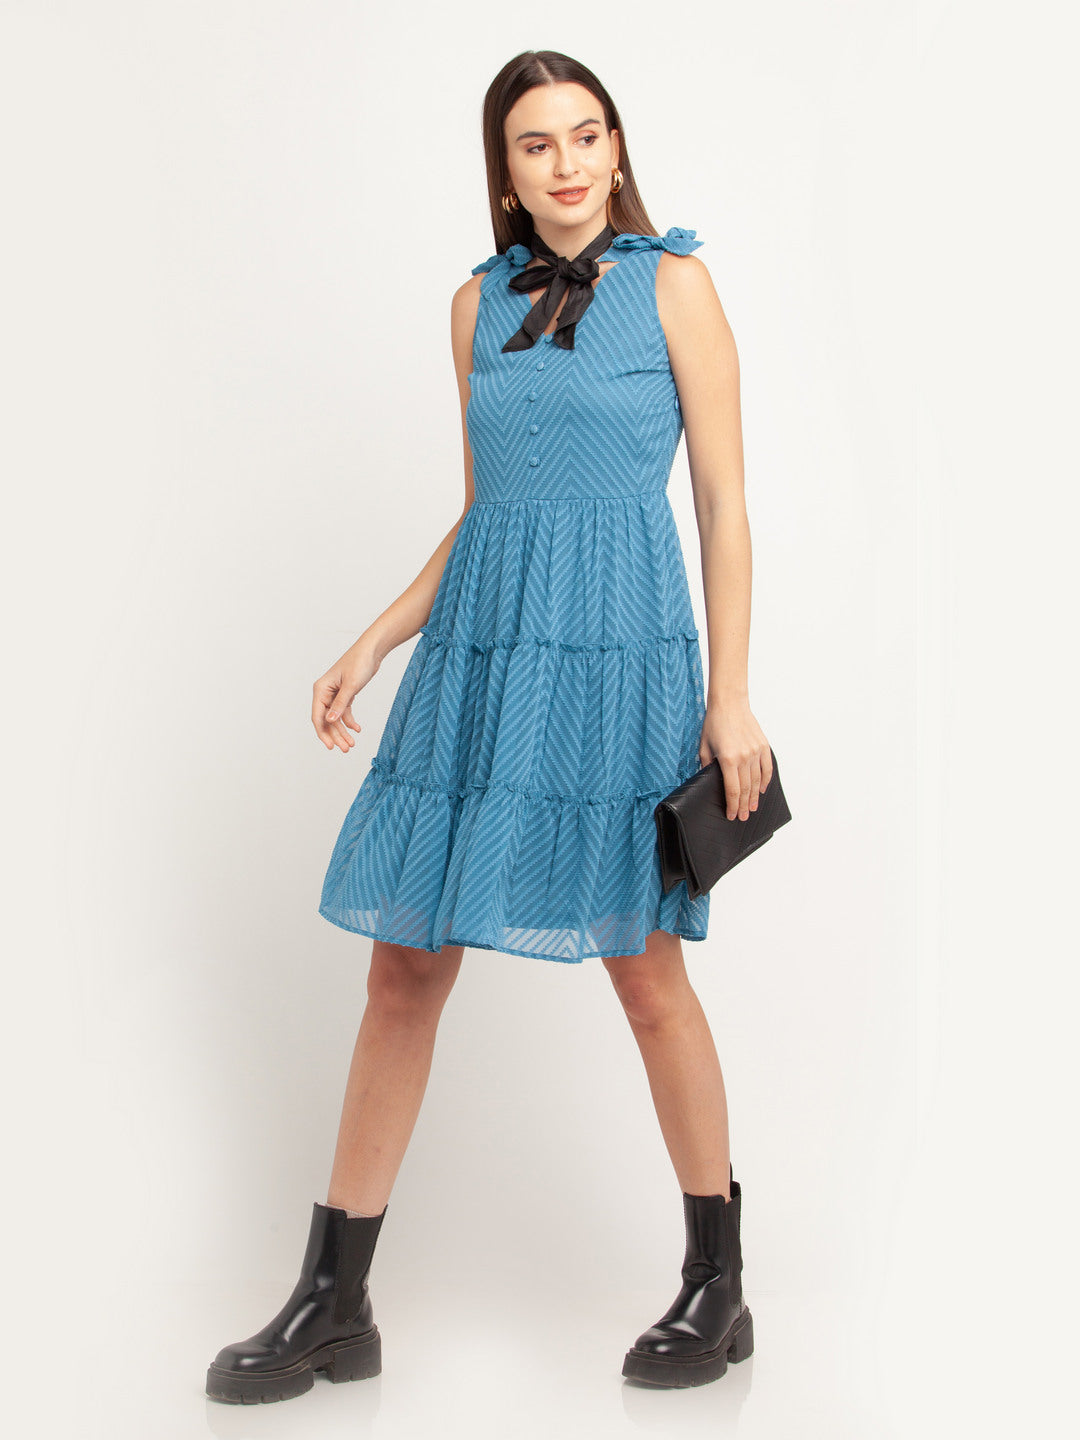 Blue Solid Tiered Short Dress For Women